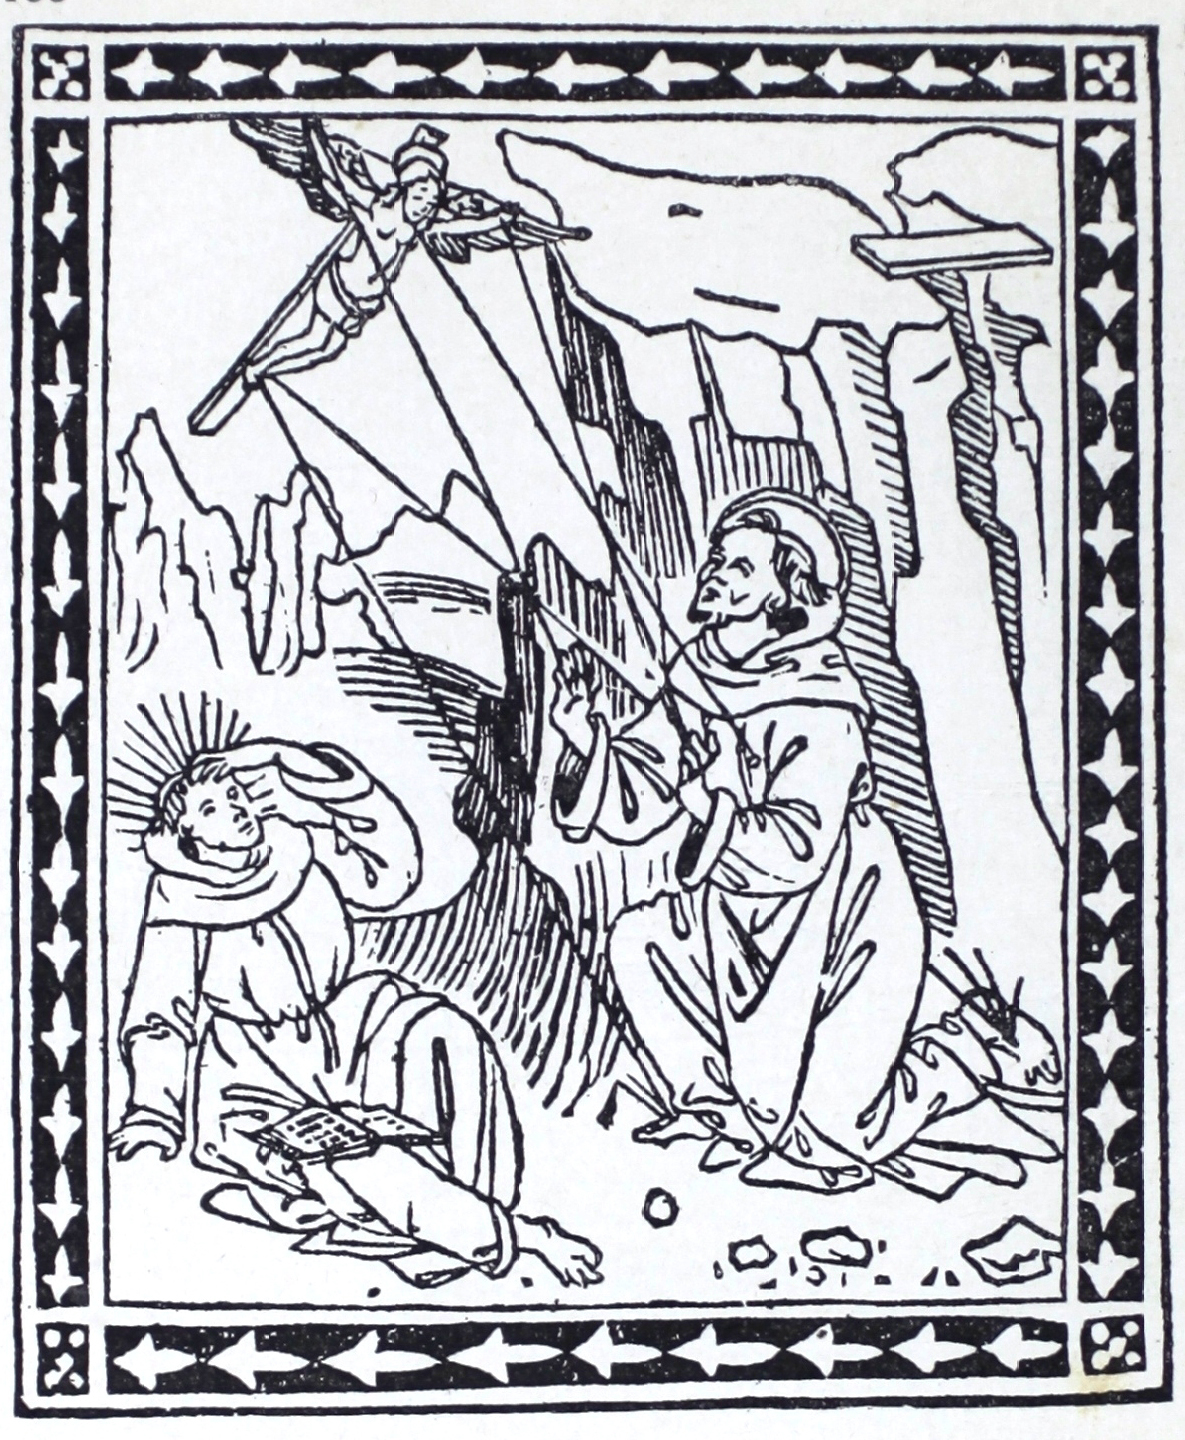 Wood engraved image shows two angels seated on the ground. The angel on the right is kneeling and flying a crucifix-shaped kite with strings. The angel on the left is rested on the groun with head raised upward and left hand to forehead. 